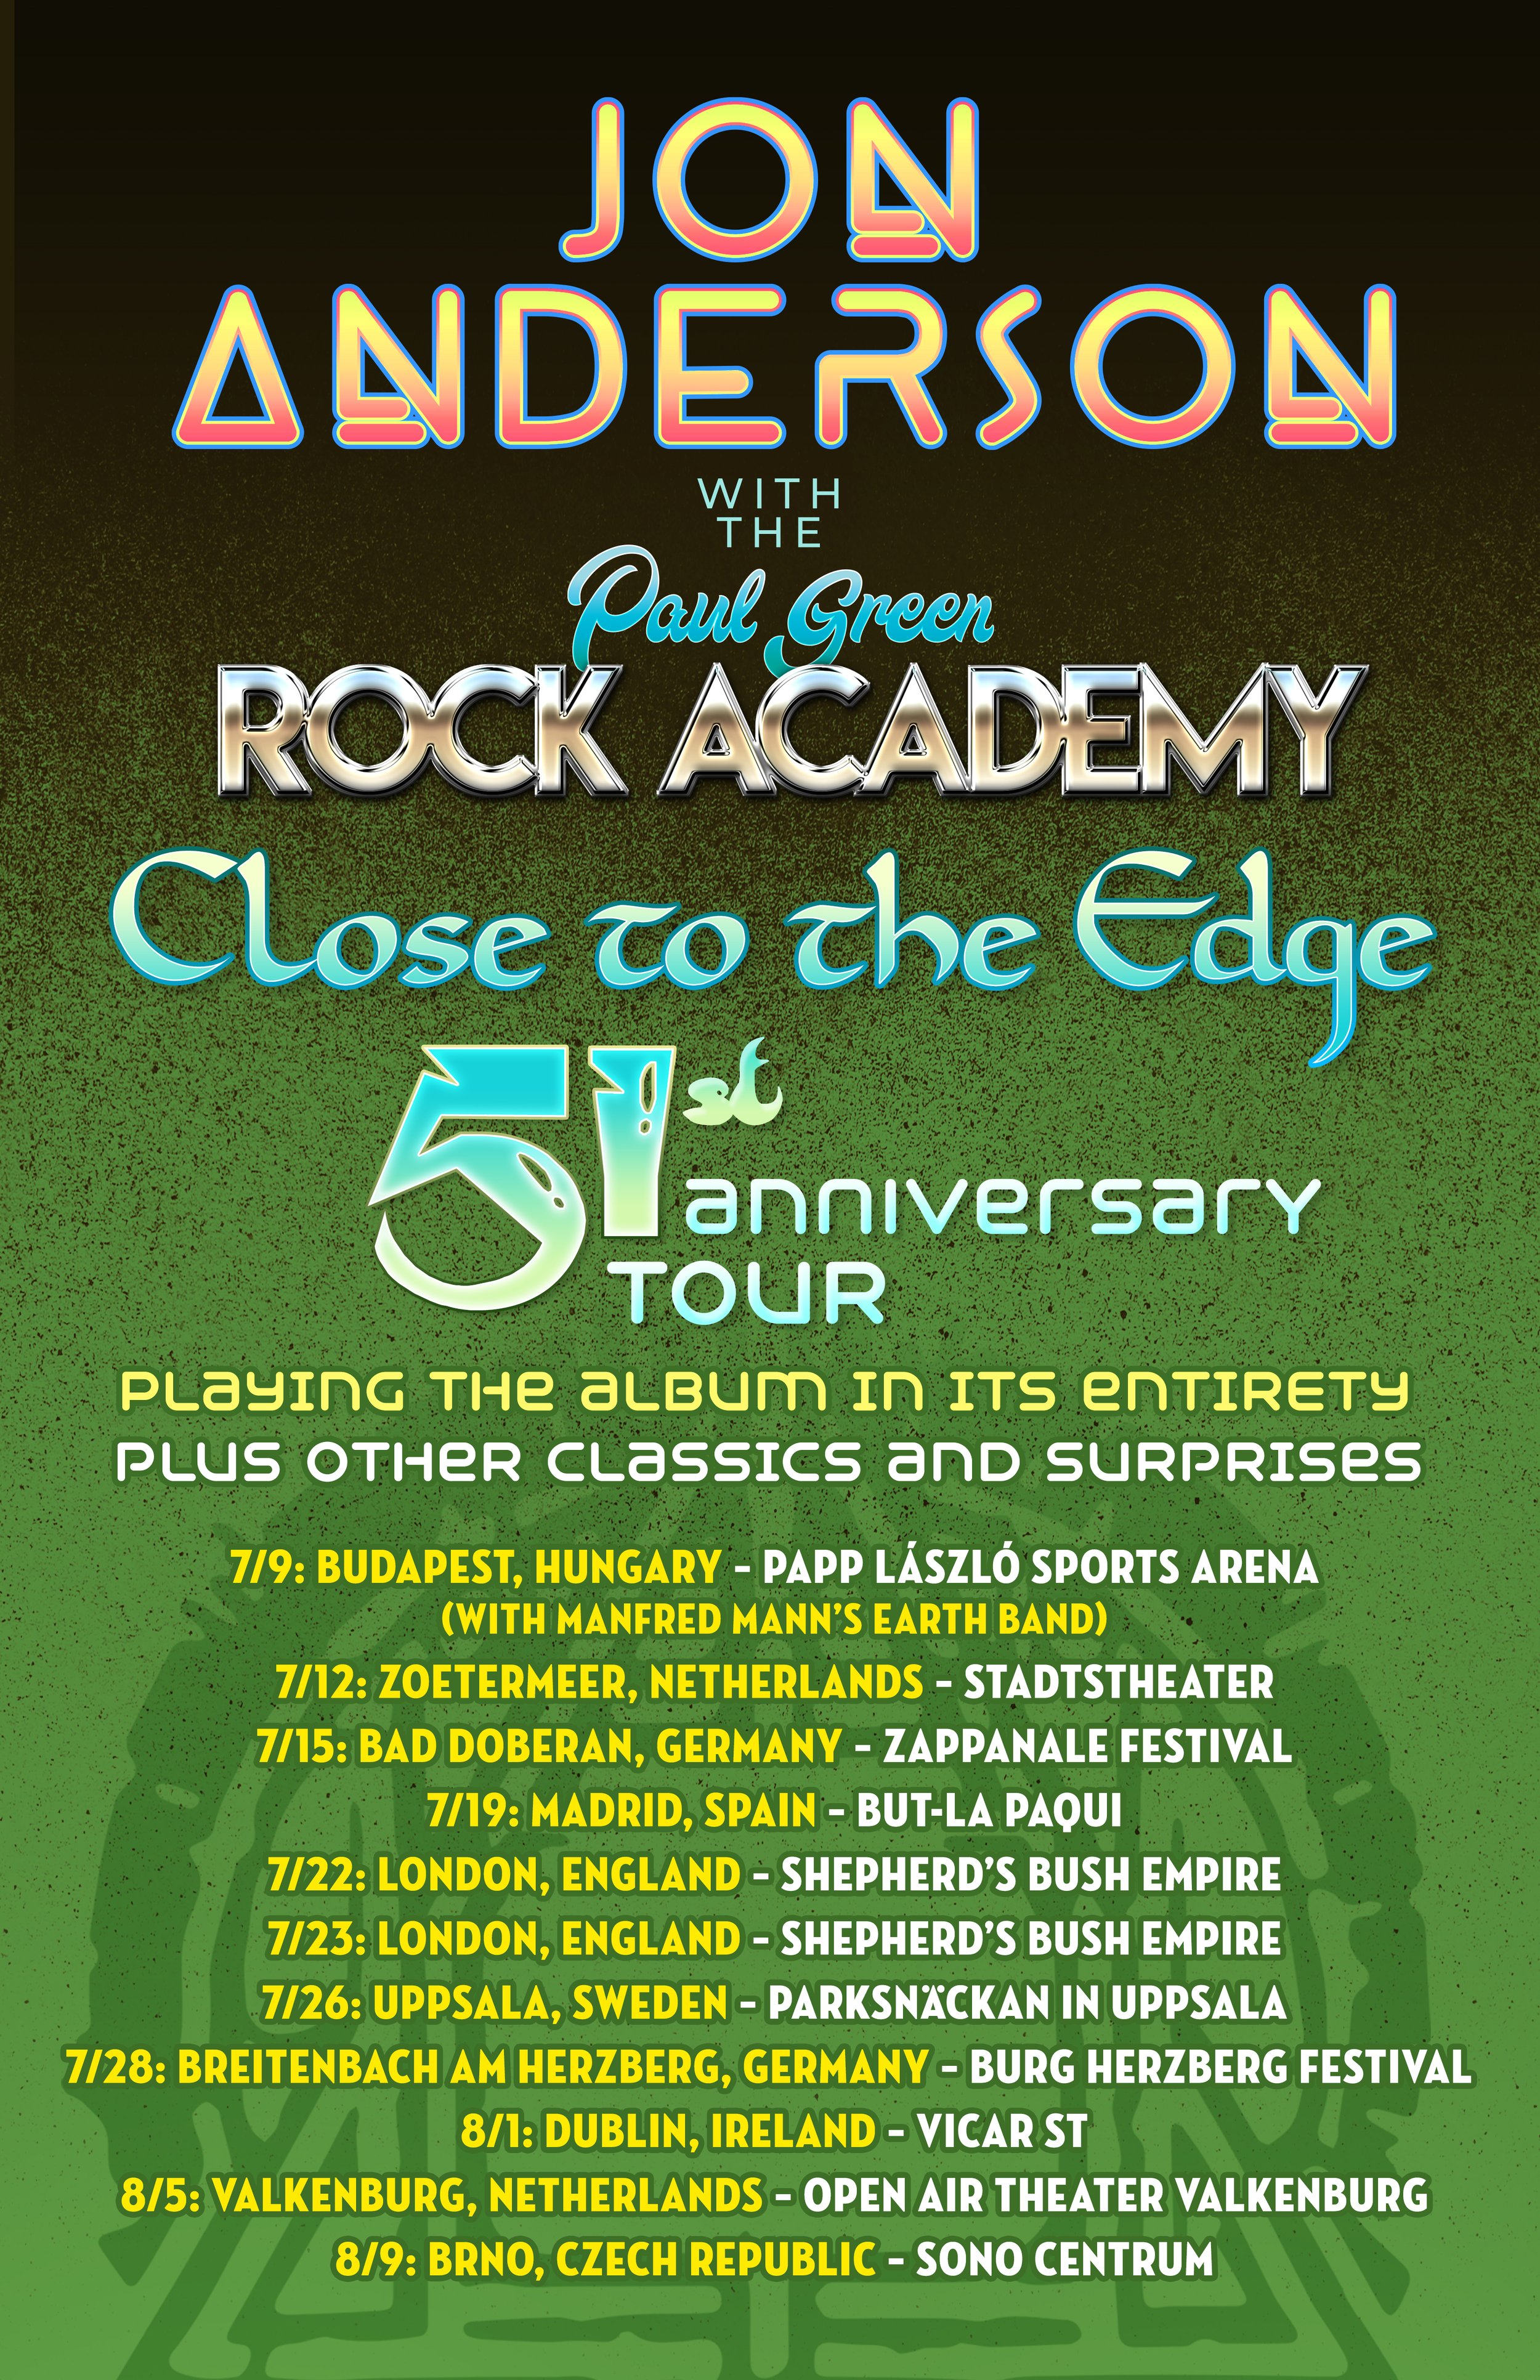 Close to the Edge 51st Anniversary Tour with the PGRA